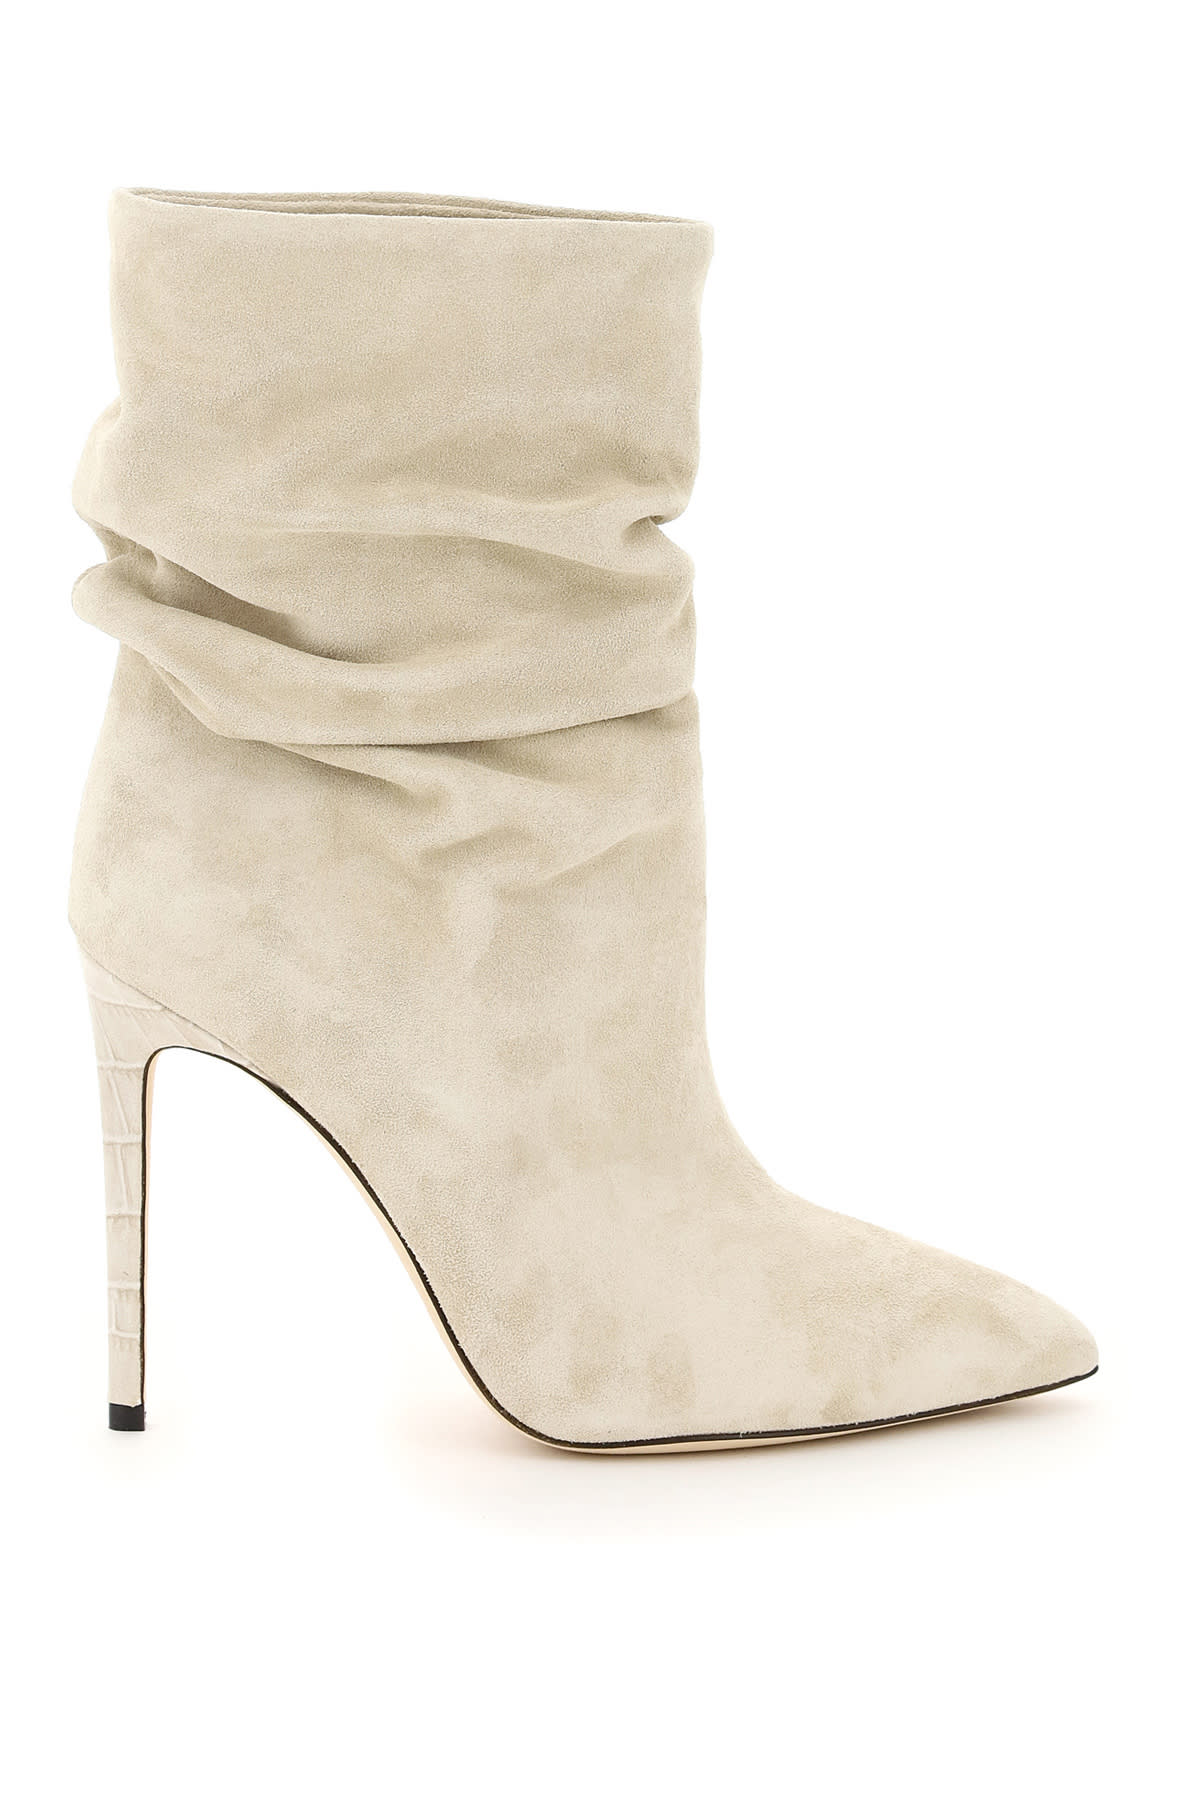 Paris Texas Slouchy Suede Boots